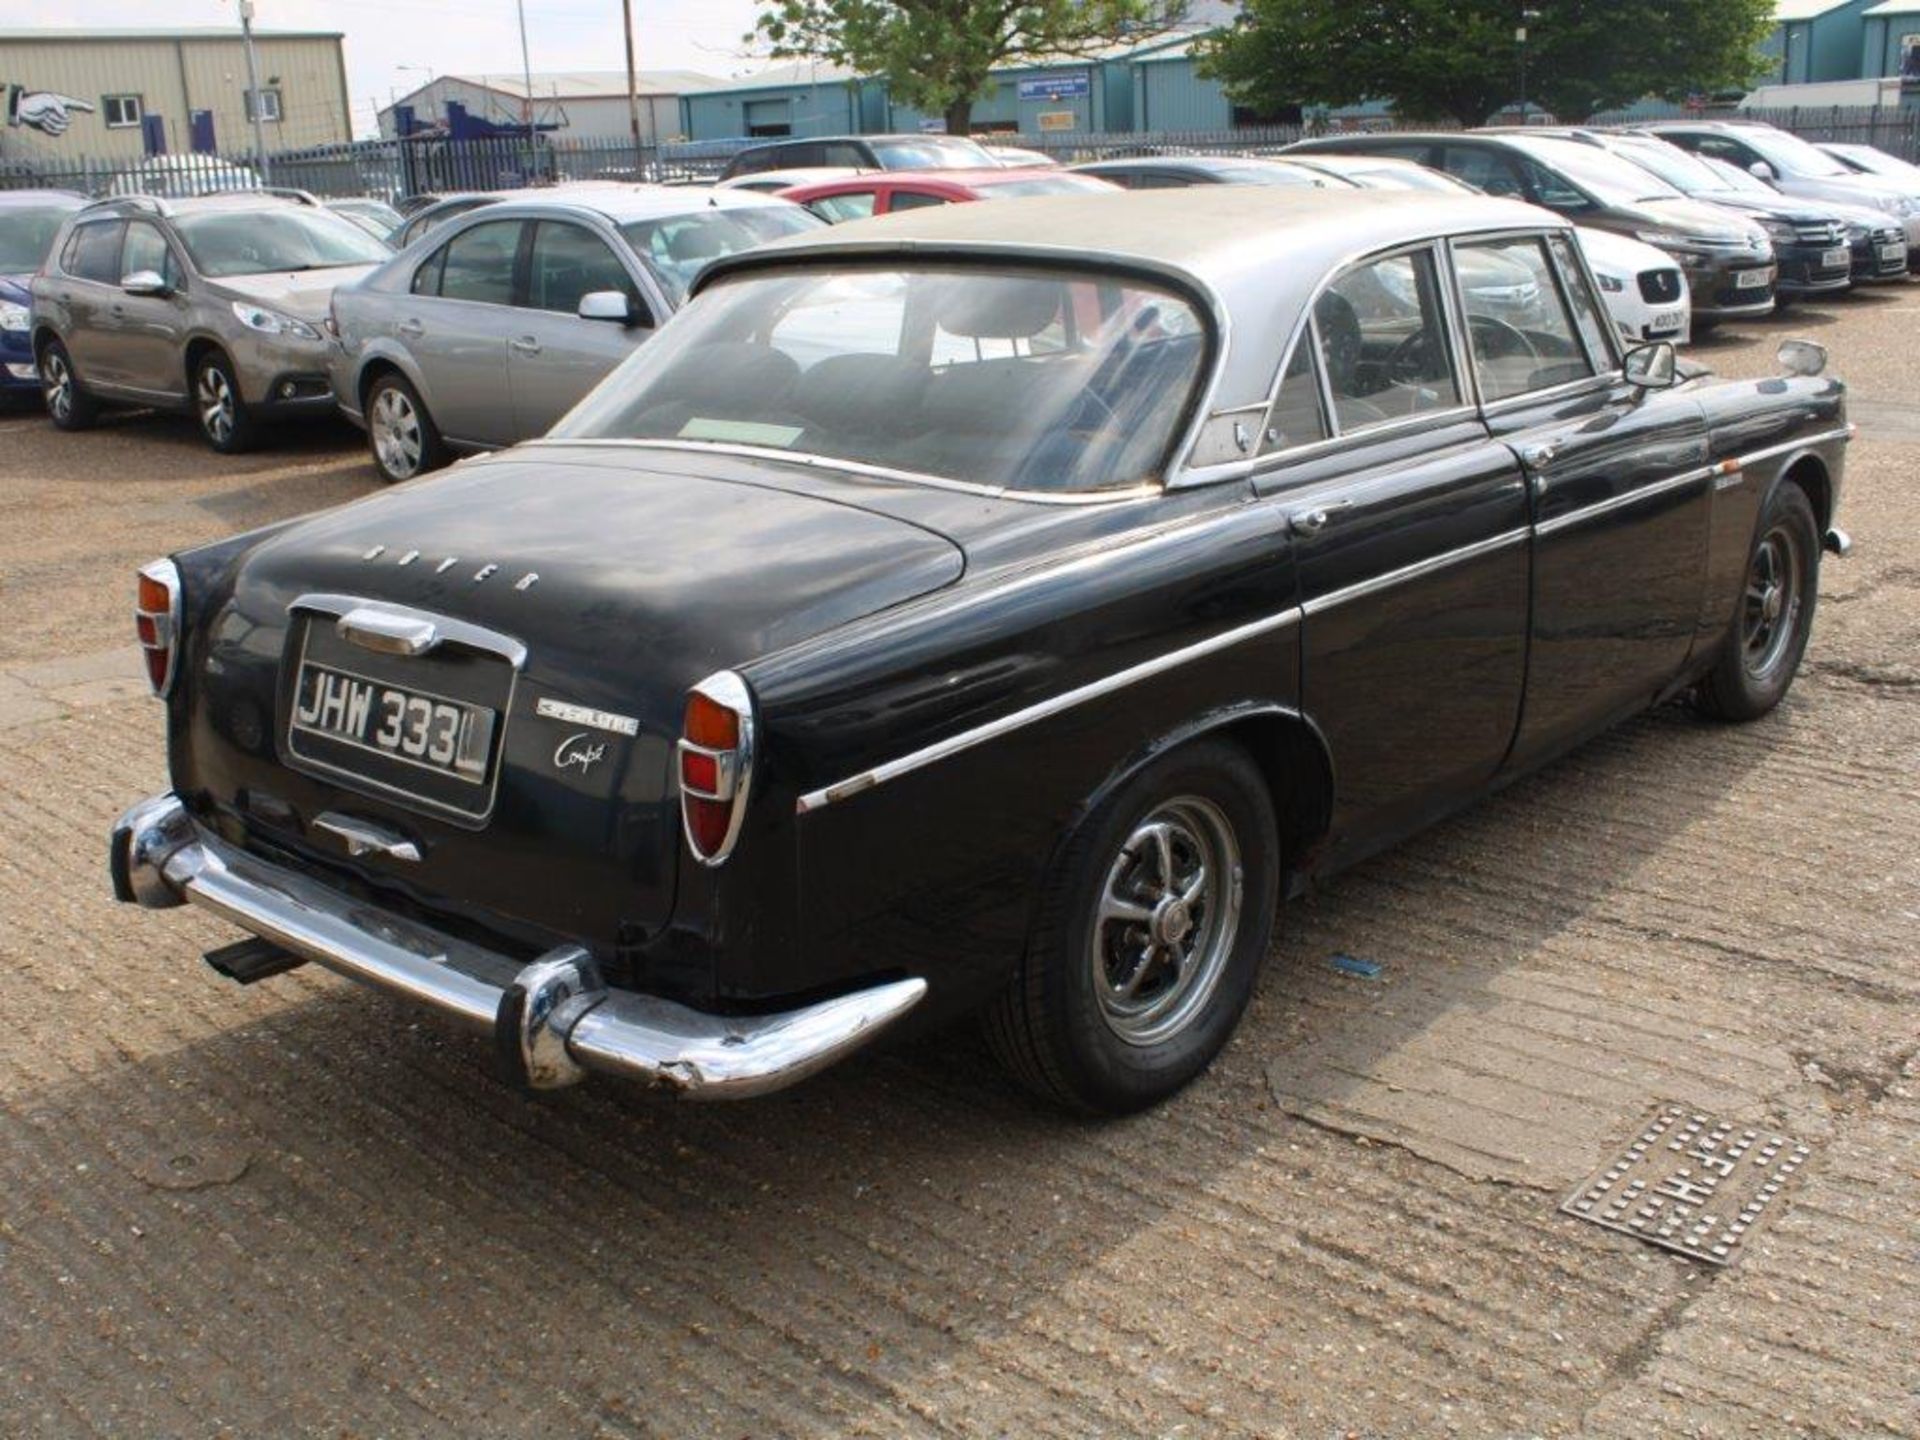 1973 Rover P5B Coupe 2.7 Diesel - Image 8 of 38